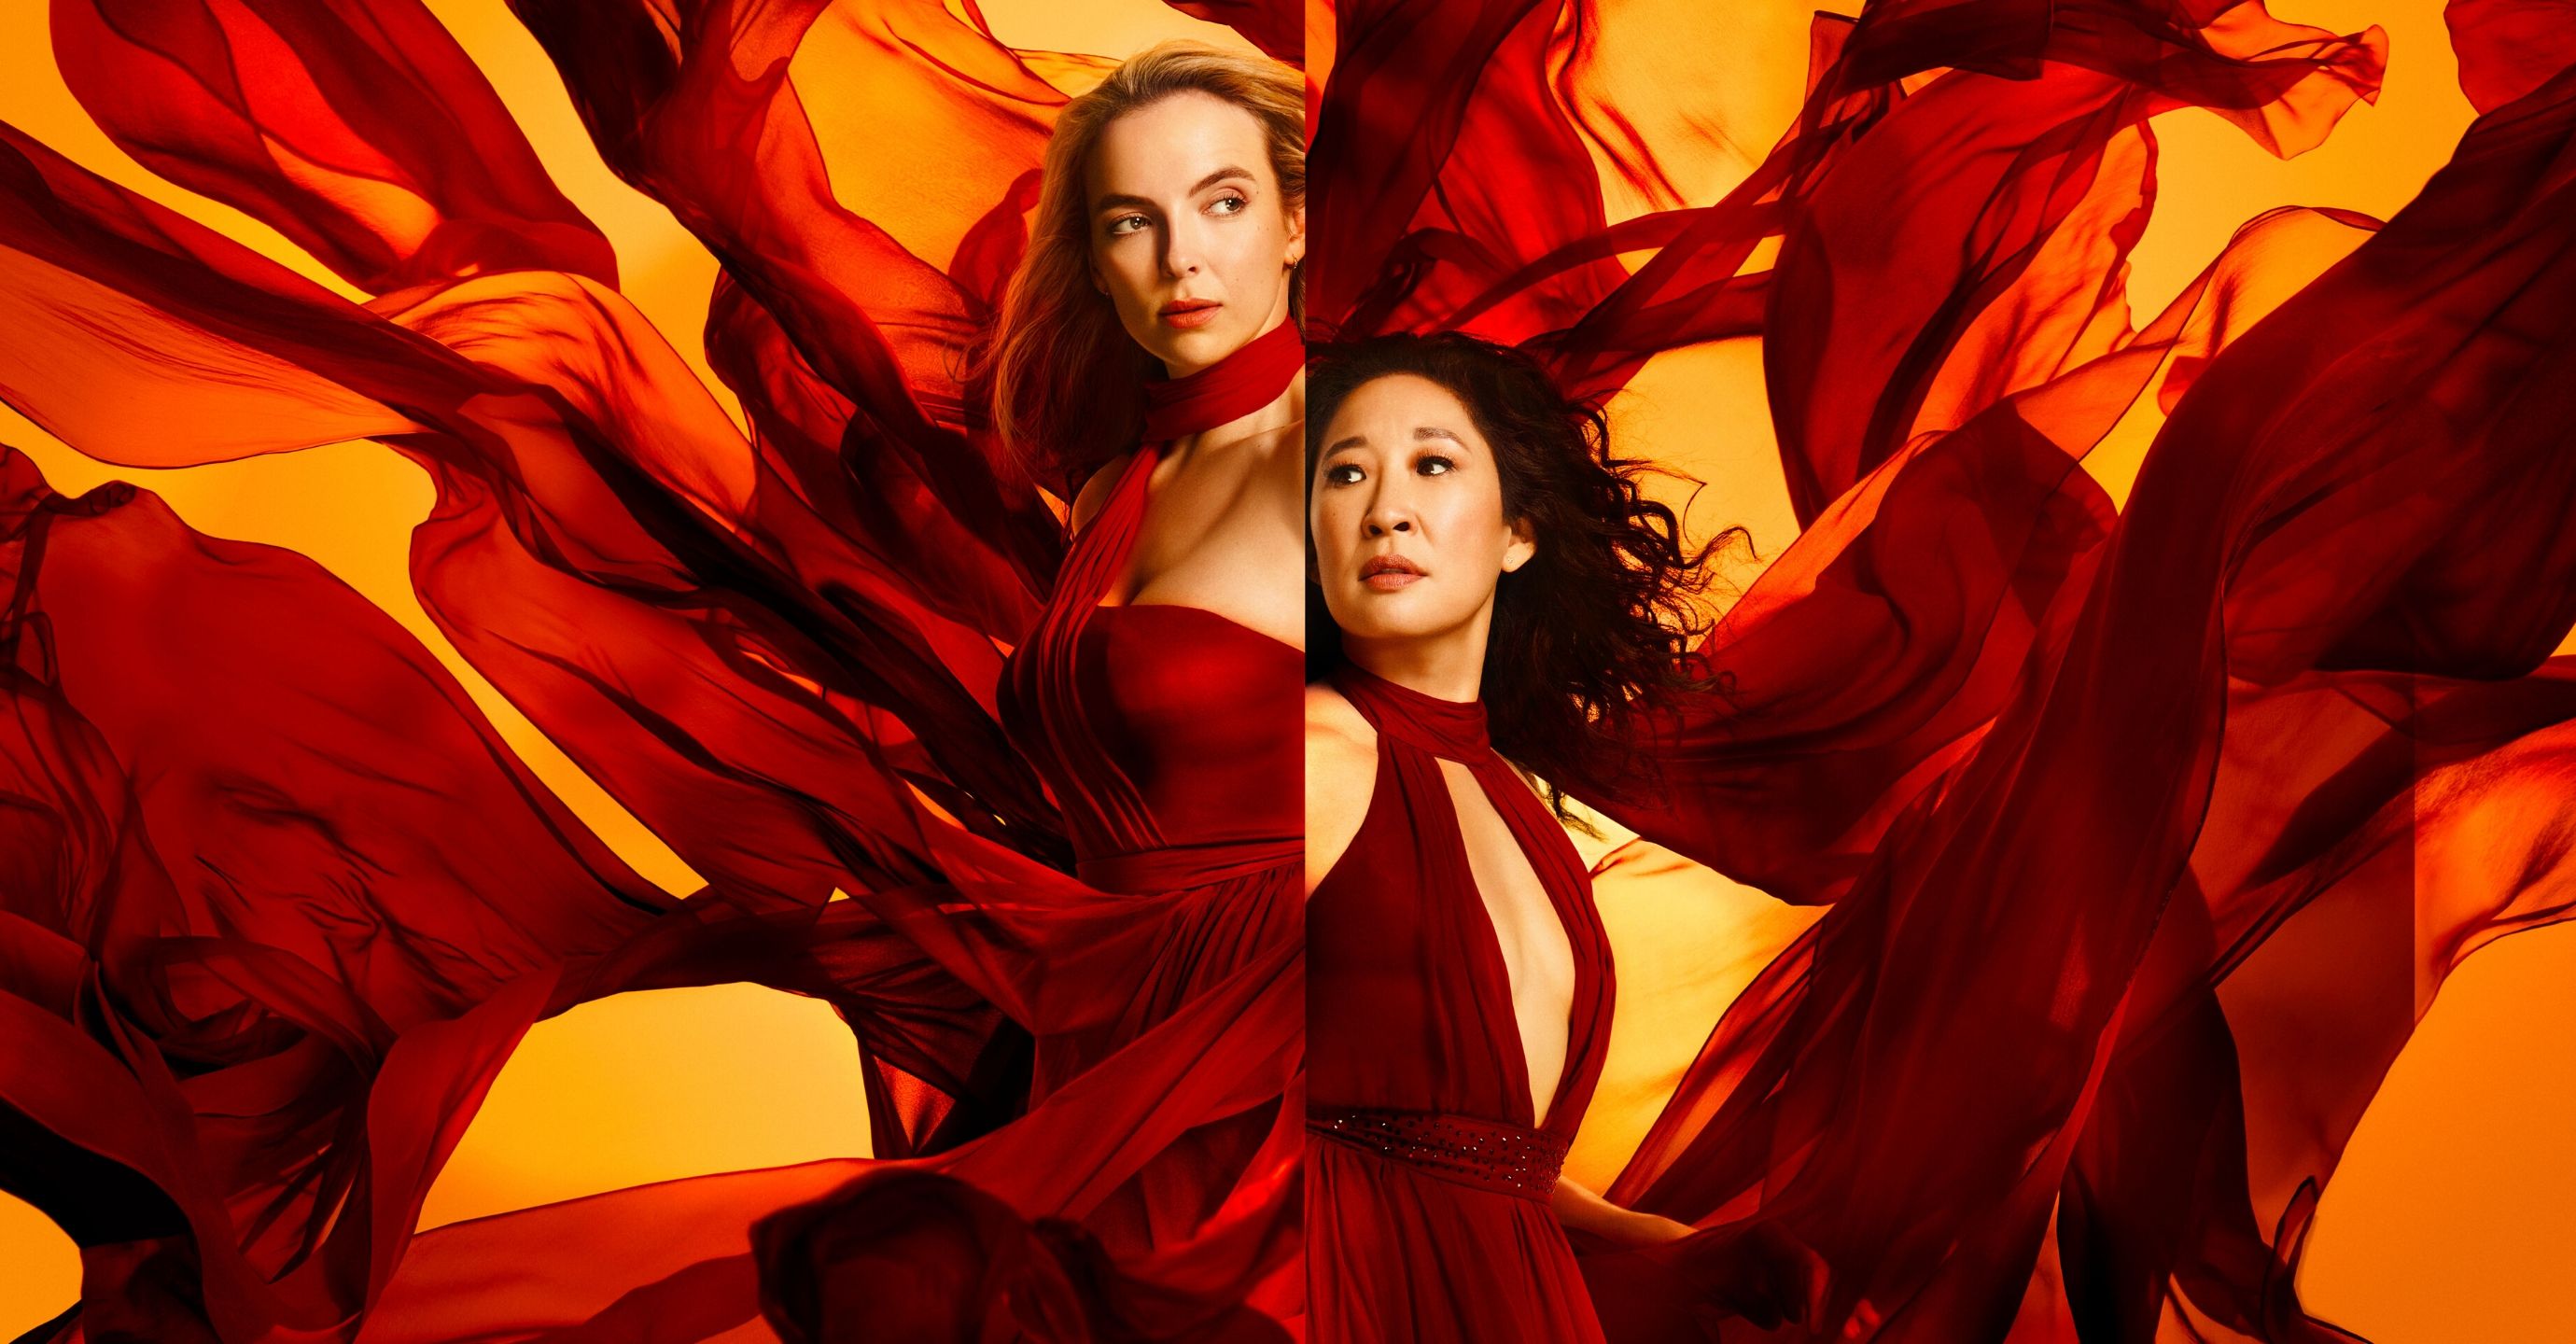 Jodie Comer and Sandra Oh as Villanelle and Eve, both in red dresses looking in opposite directions